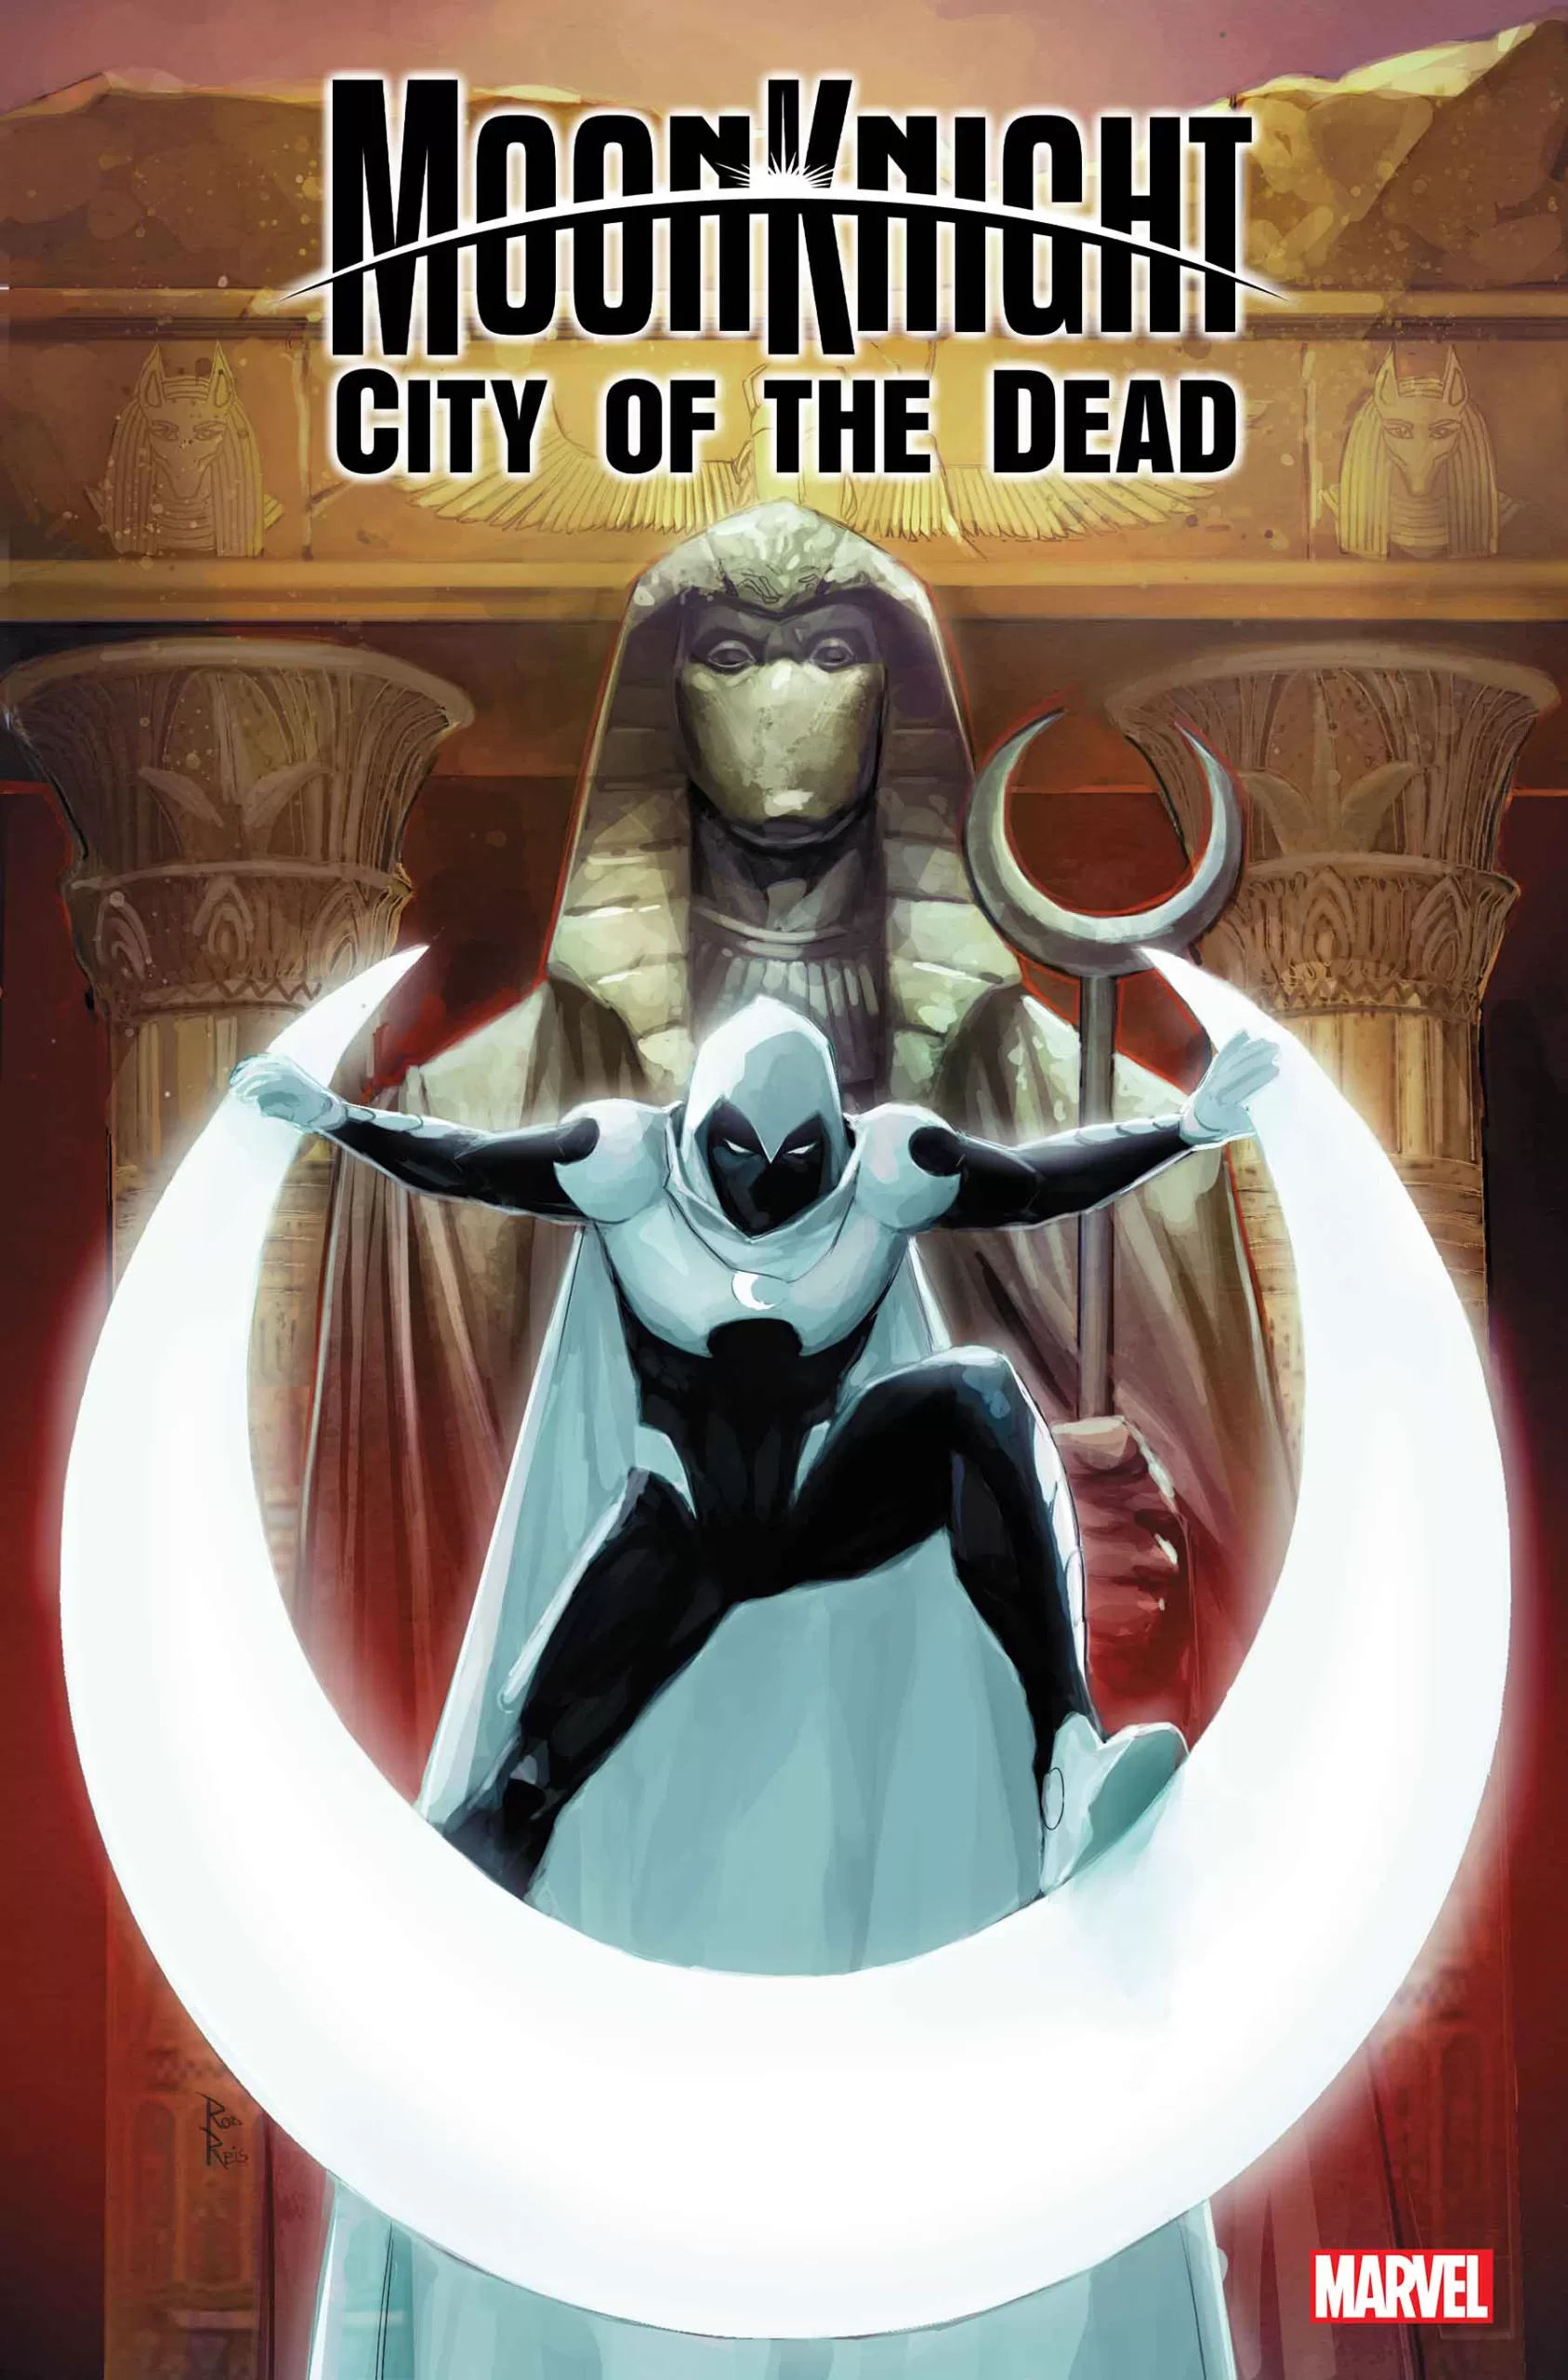 Moon Knight: The MCU's Scarlet Scarab to Make Marvel Comics Debut